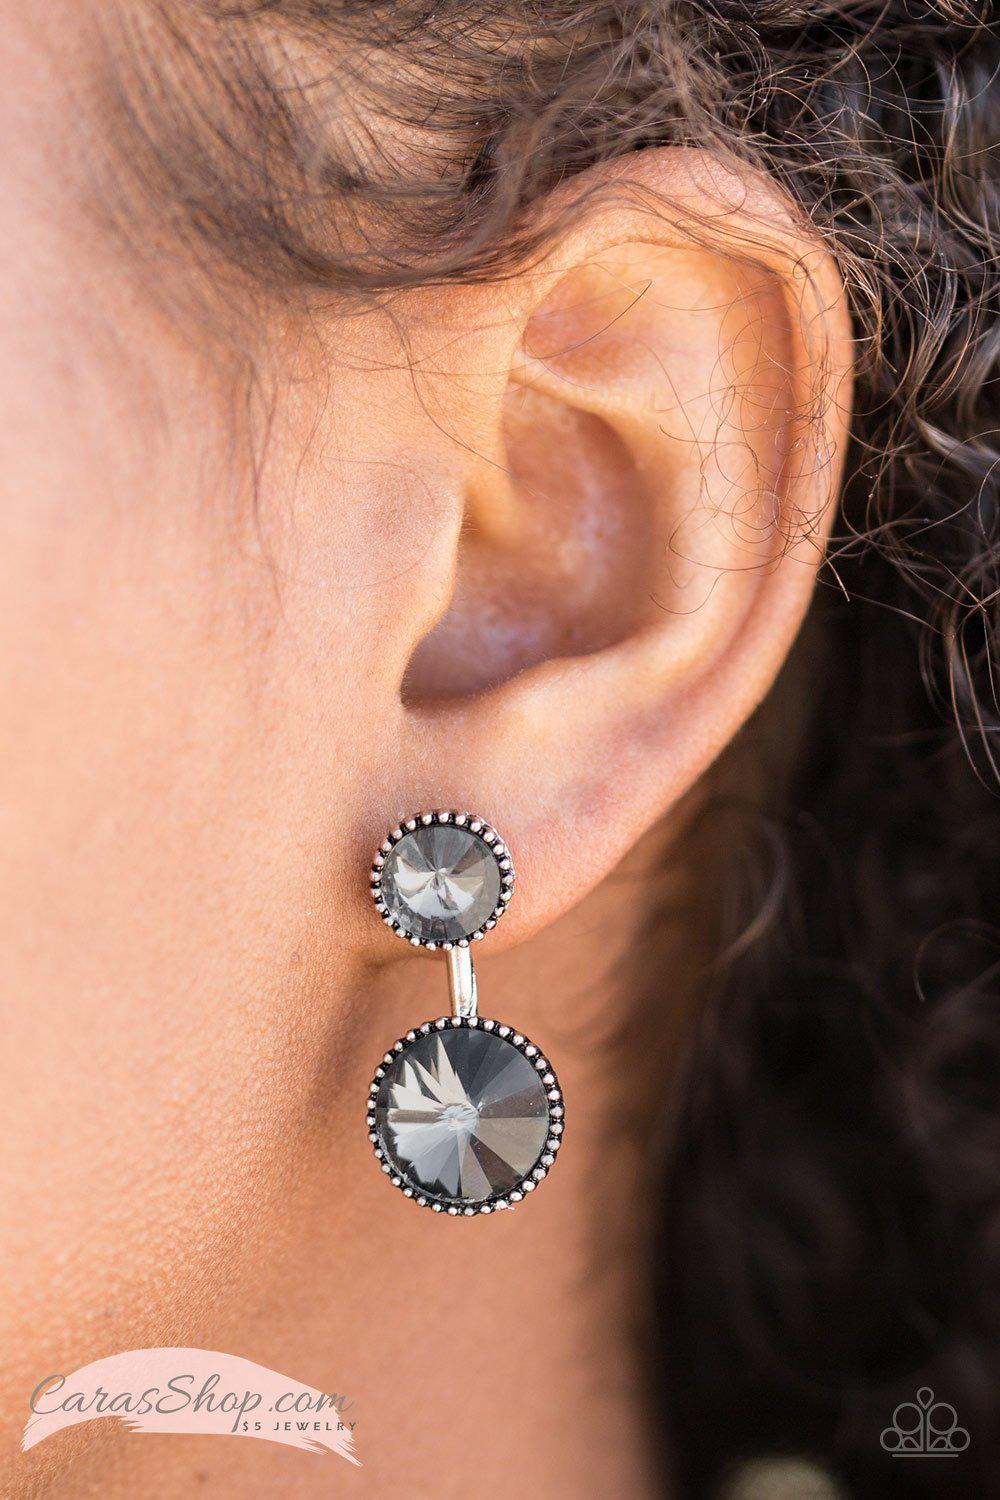 Bling Squad - Silver Gem Double-sided Post Earrings - Paparazzi Accessories-CarasShop.com - $5 Jewelry by Cara Jewels